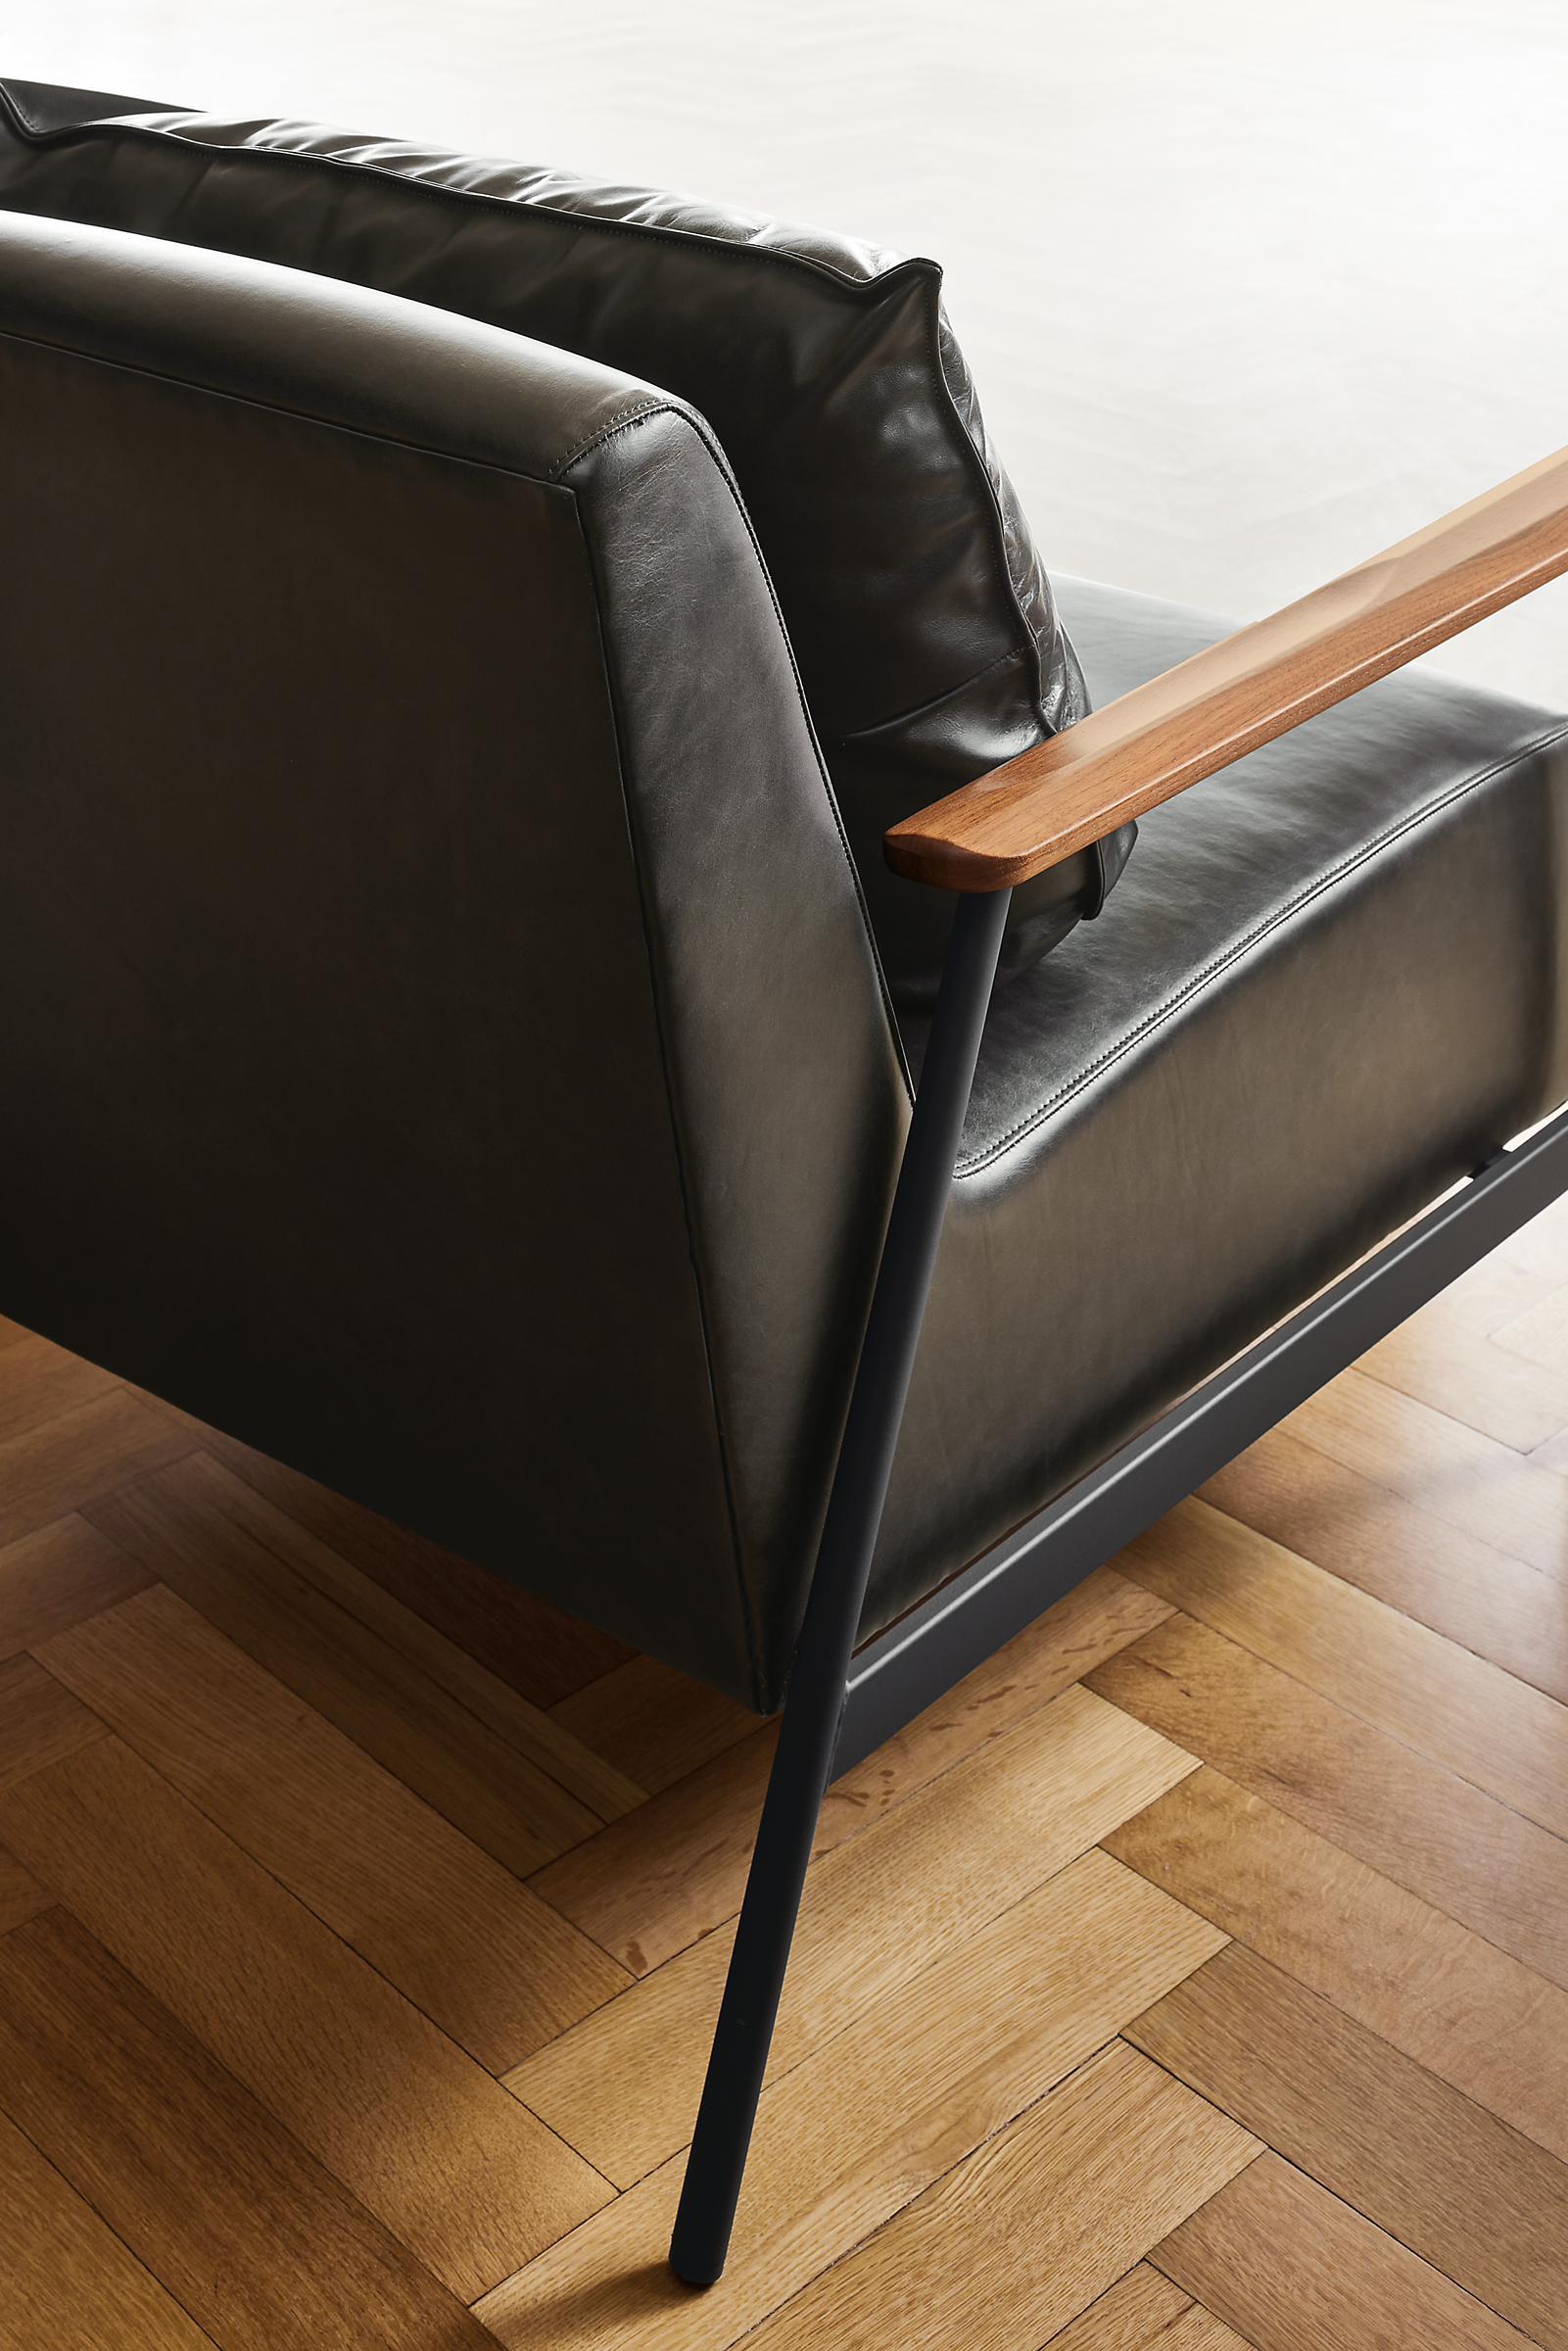 Detail showing back side of Xavier chair in Palermo Leather.